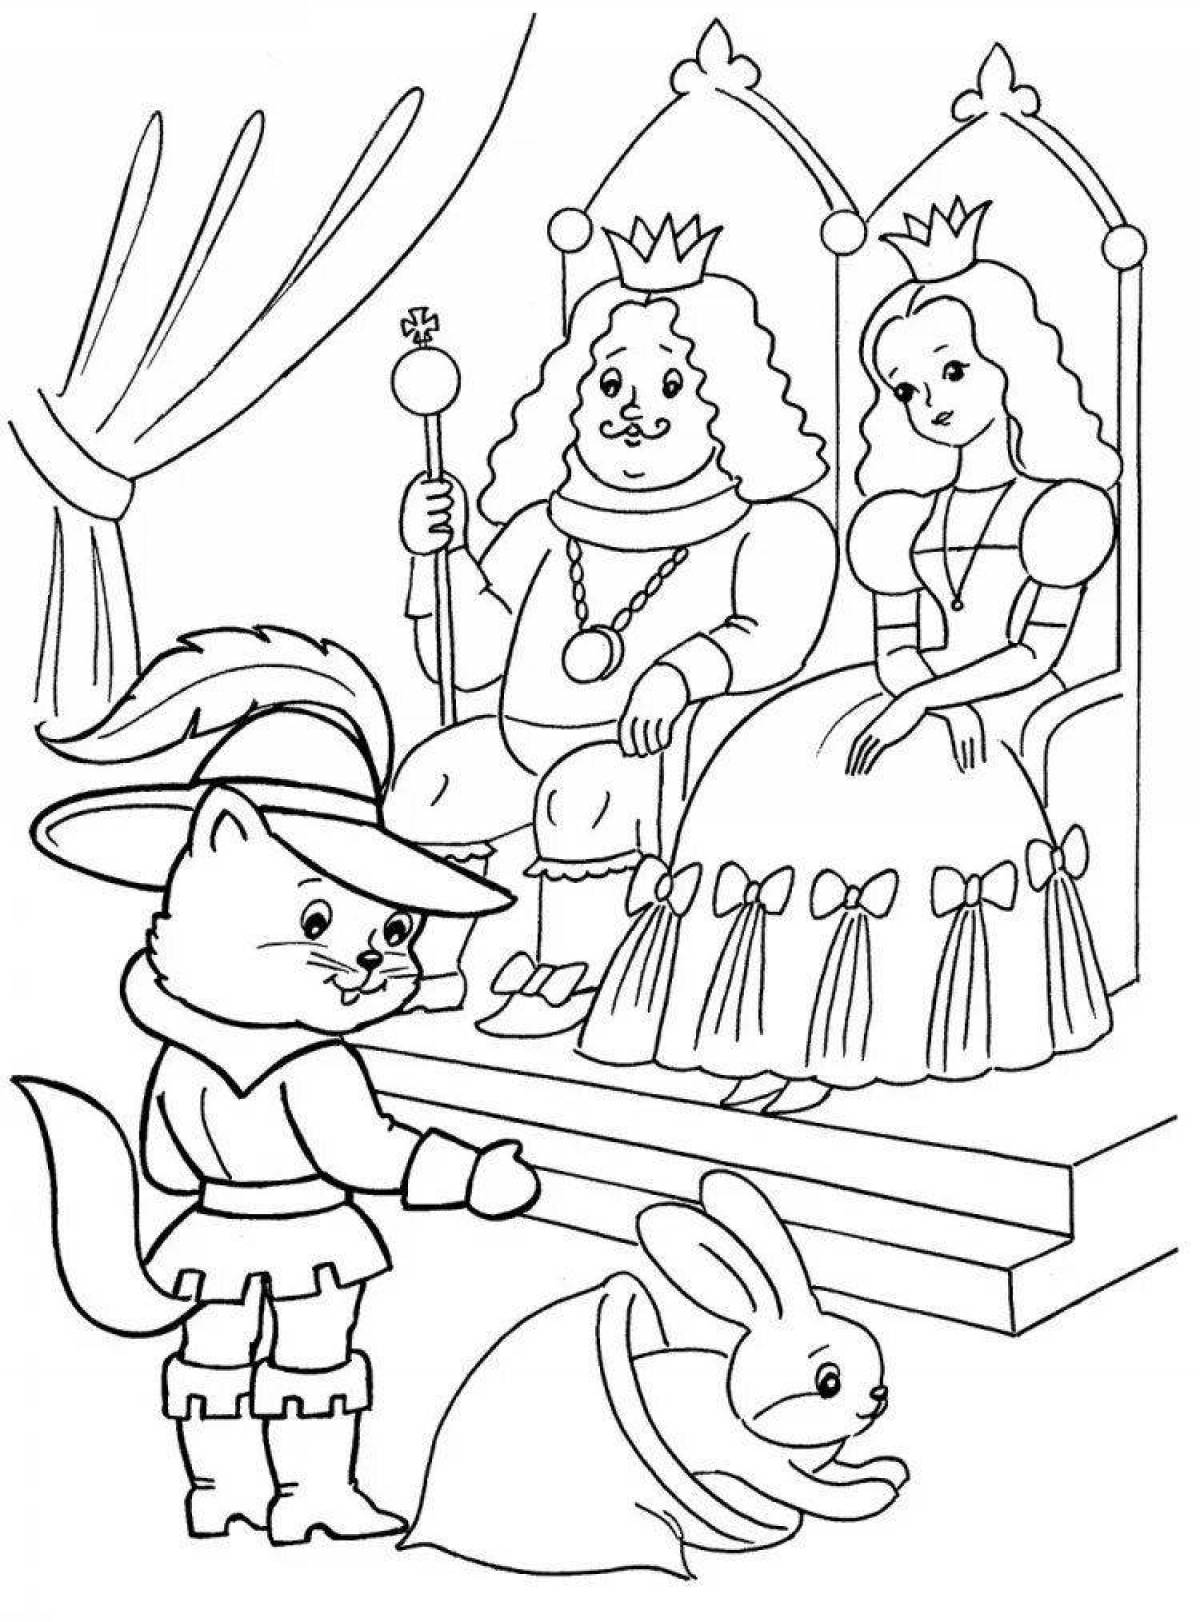 Charles Perrault's spicy Puss in Boots coloring book